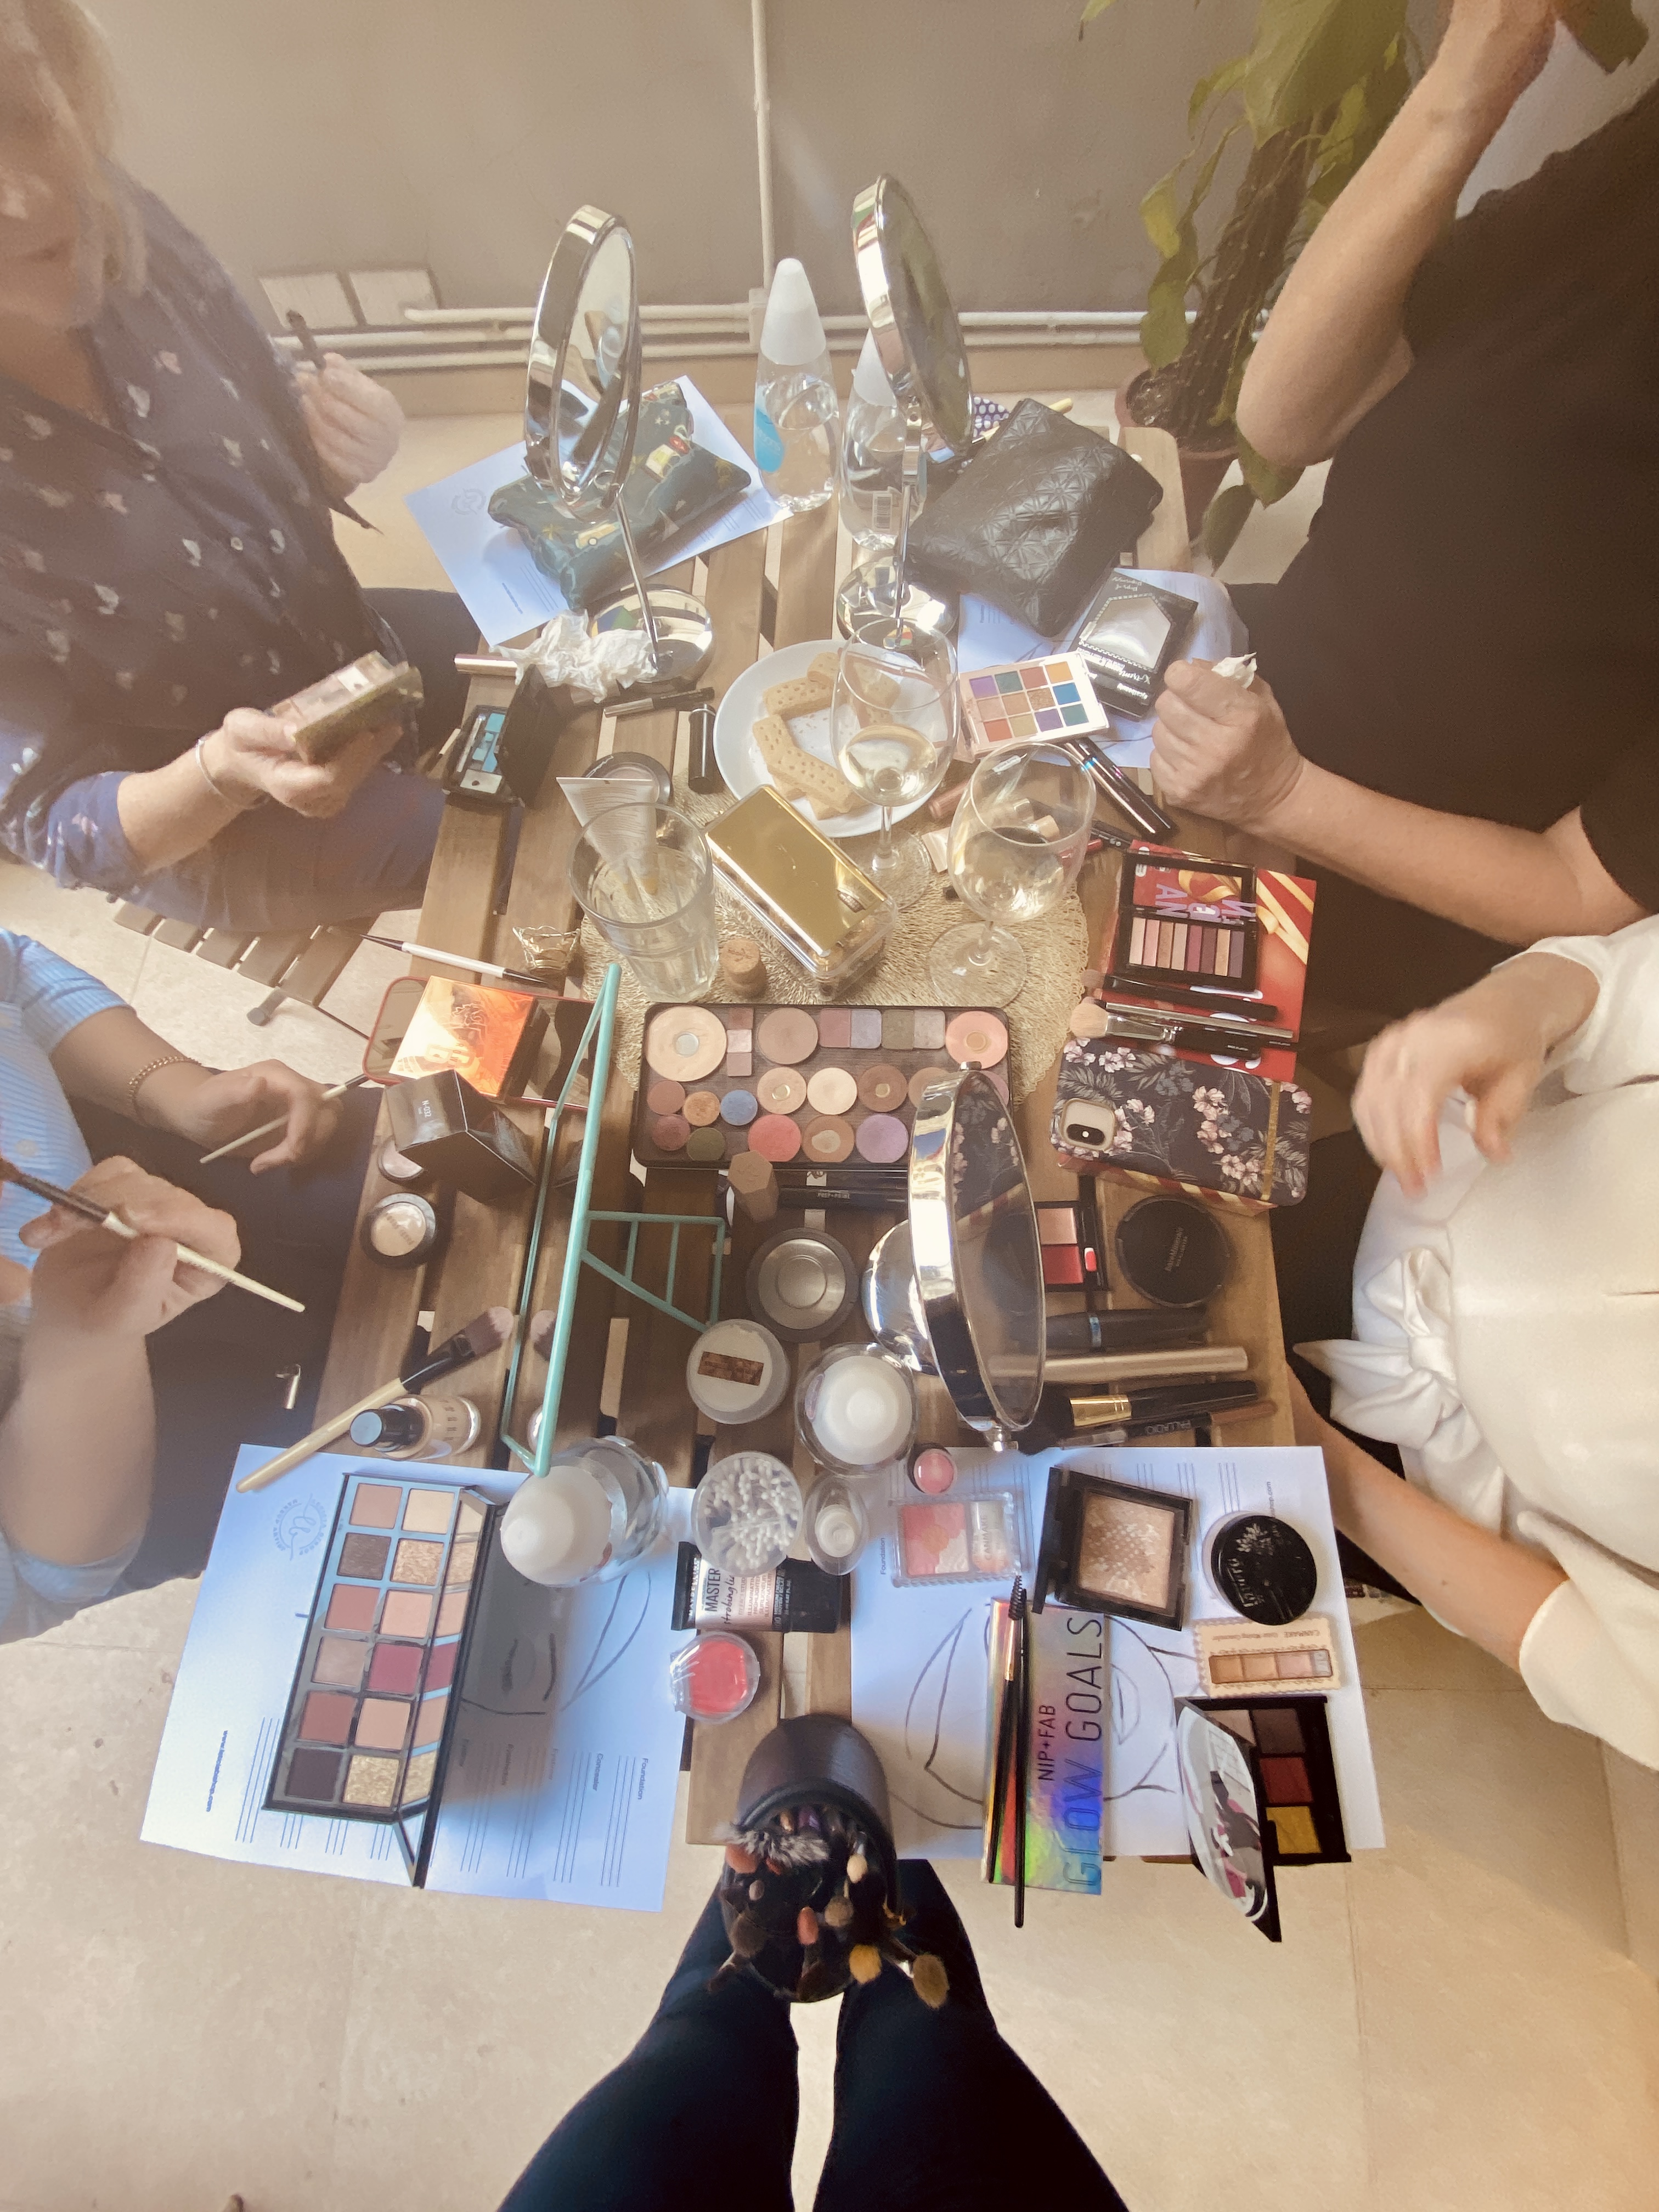 Group makeup lessons